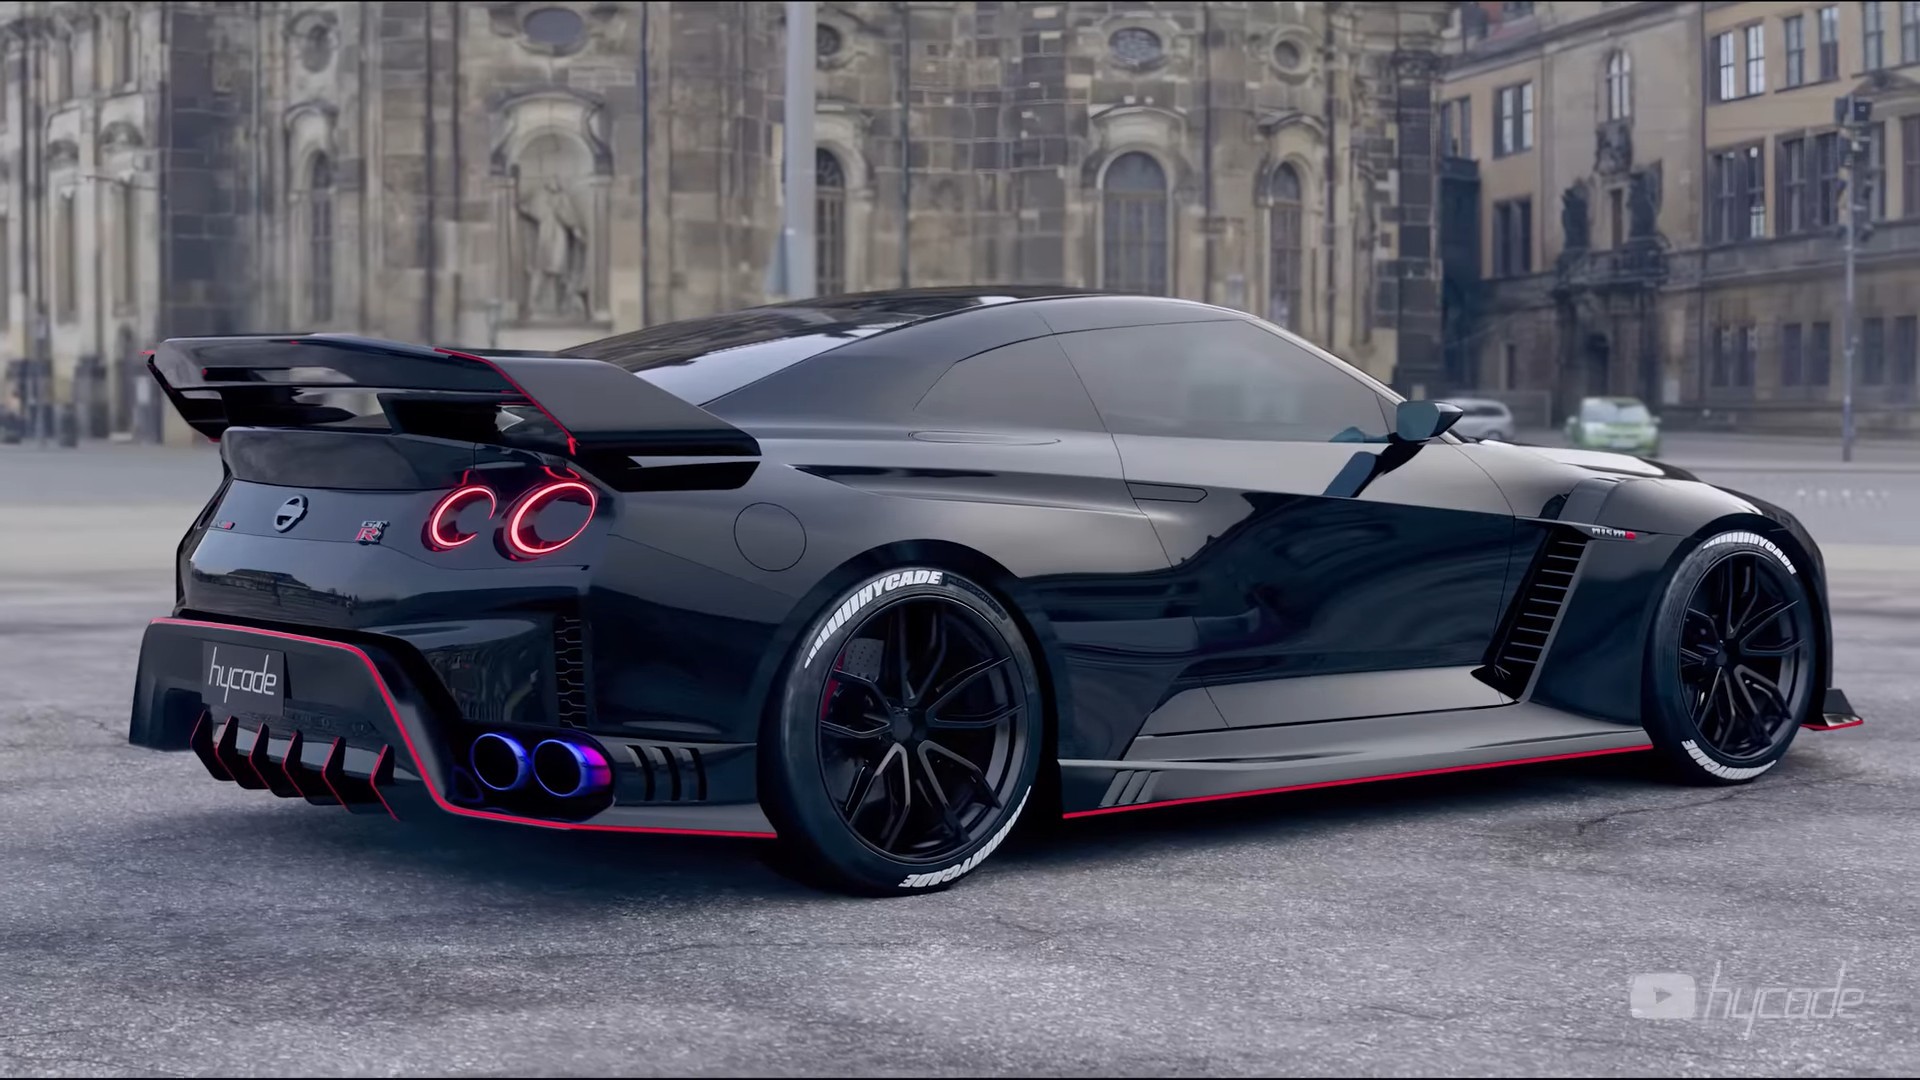 Nissan GT-R R36 Nismo 🥰, follow for more